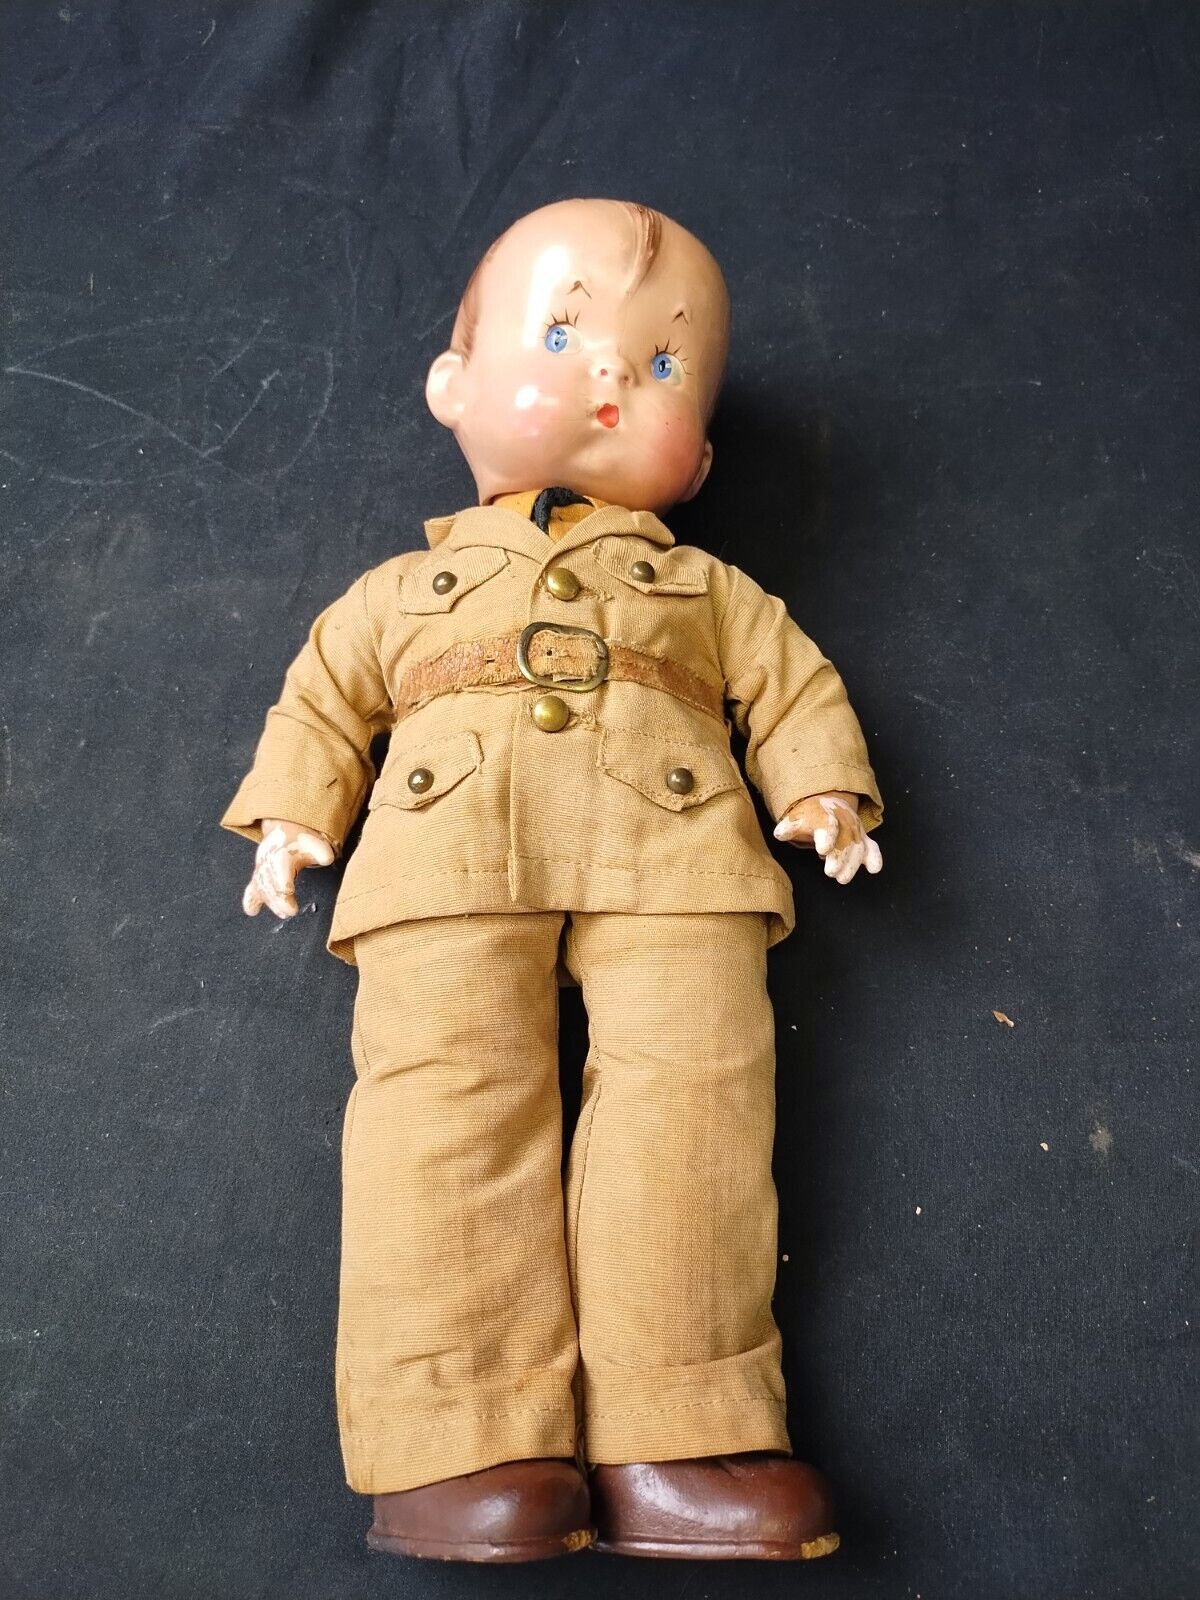 Vintage Effanbee Skippy Soldier Doll WWII Composition Cloth Military Uniform